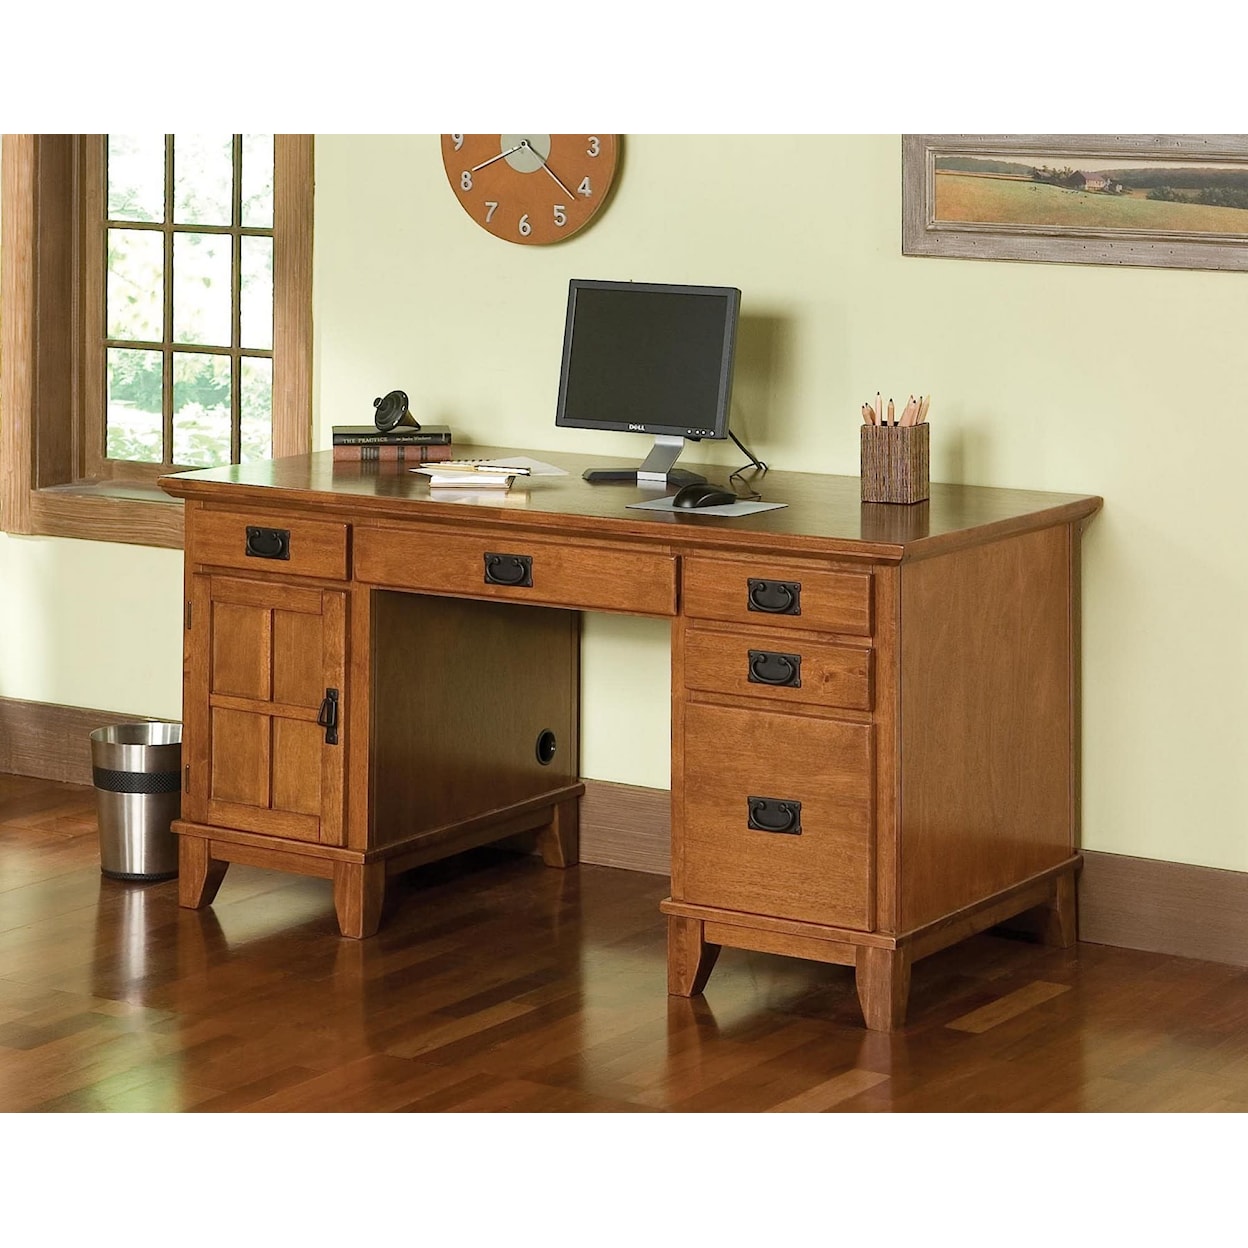 homestyles Arts and Crafts Double Pedestal Desk